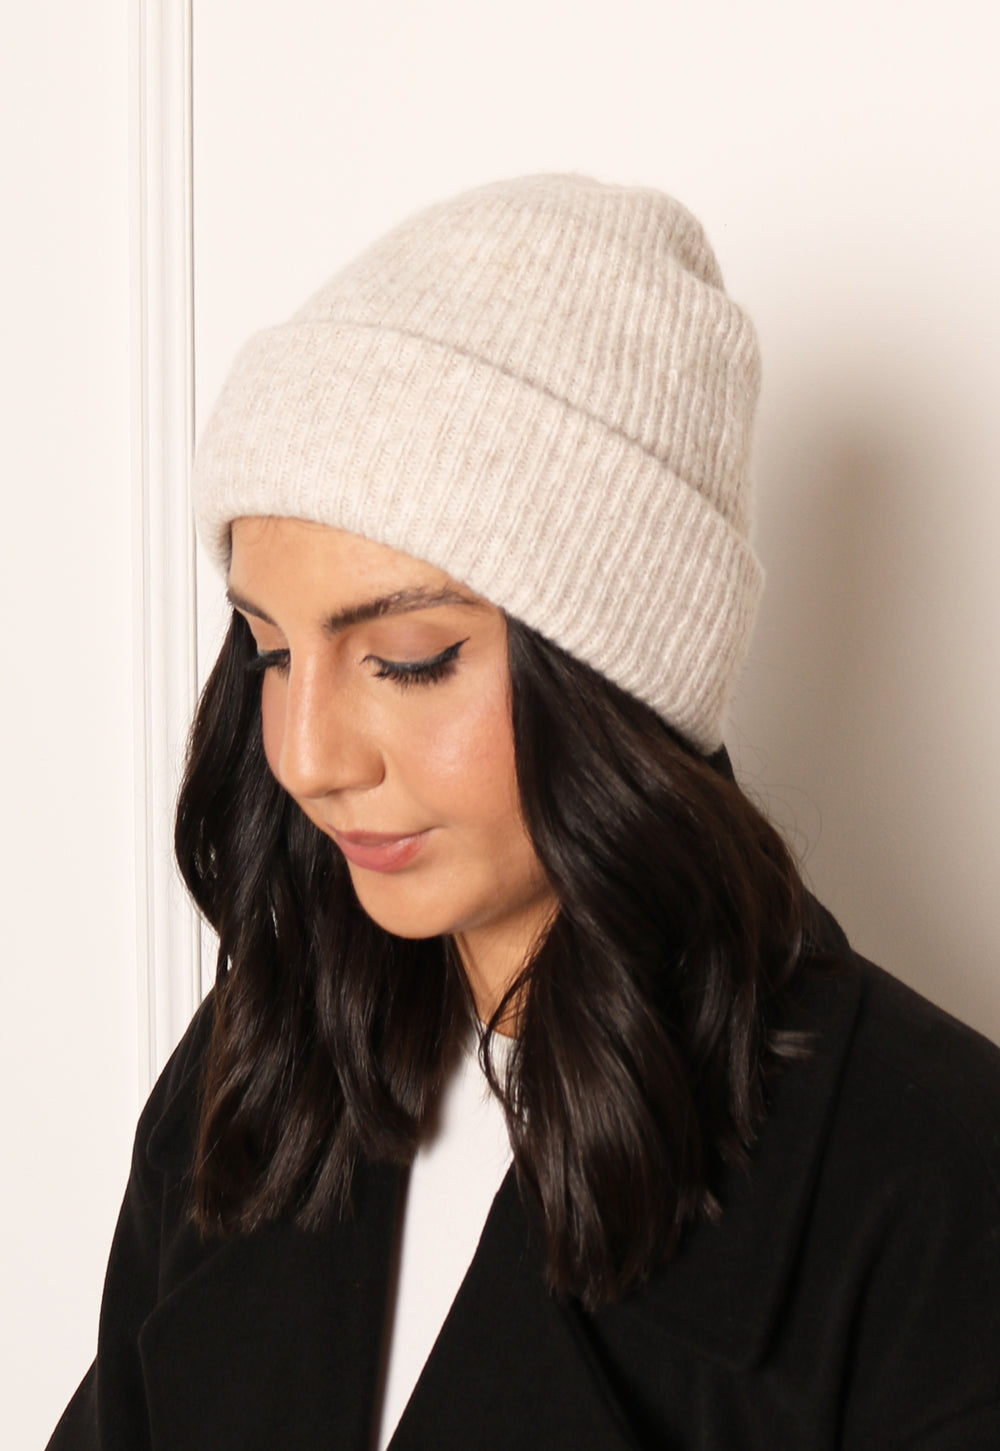 PIECES Cashmere Fluffy Knit Ribbed Turn Up Beanie Hat in Cream Melange - One Nation Clothing